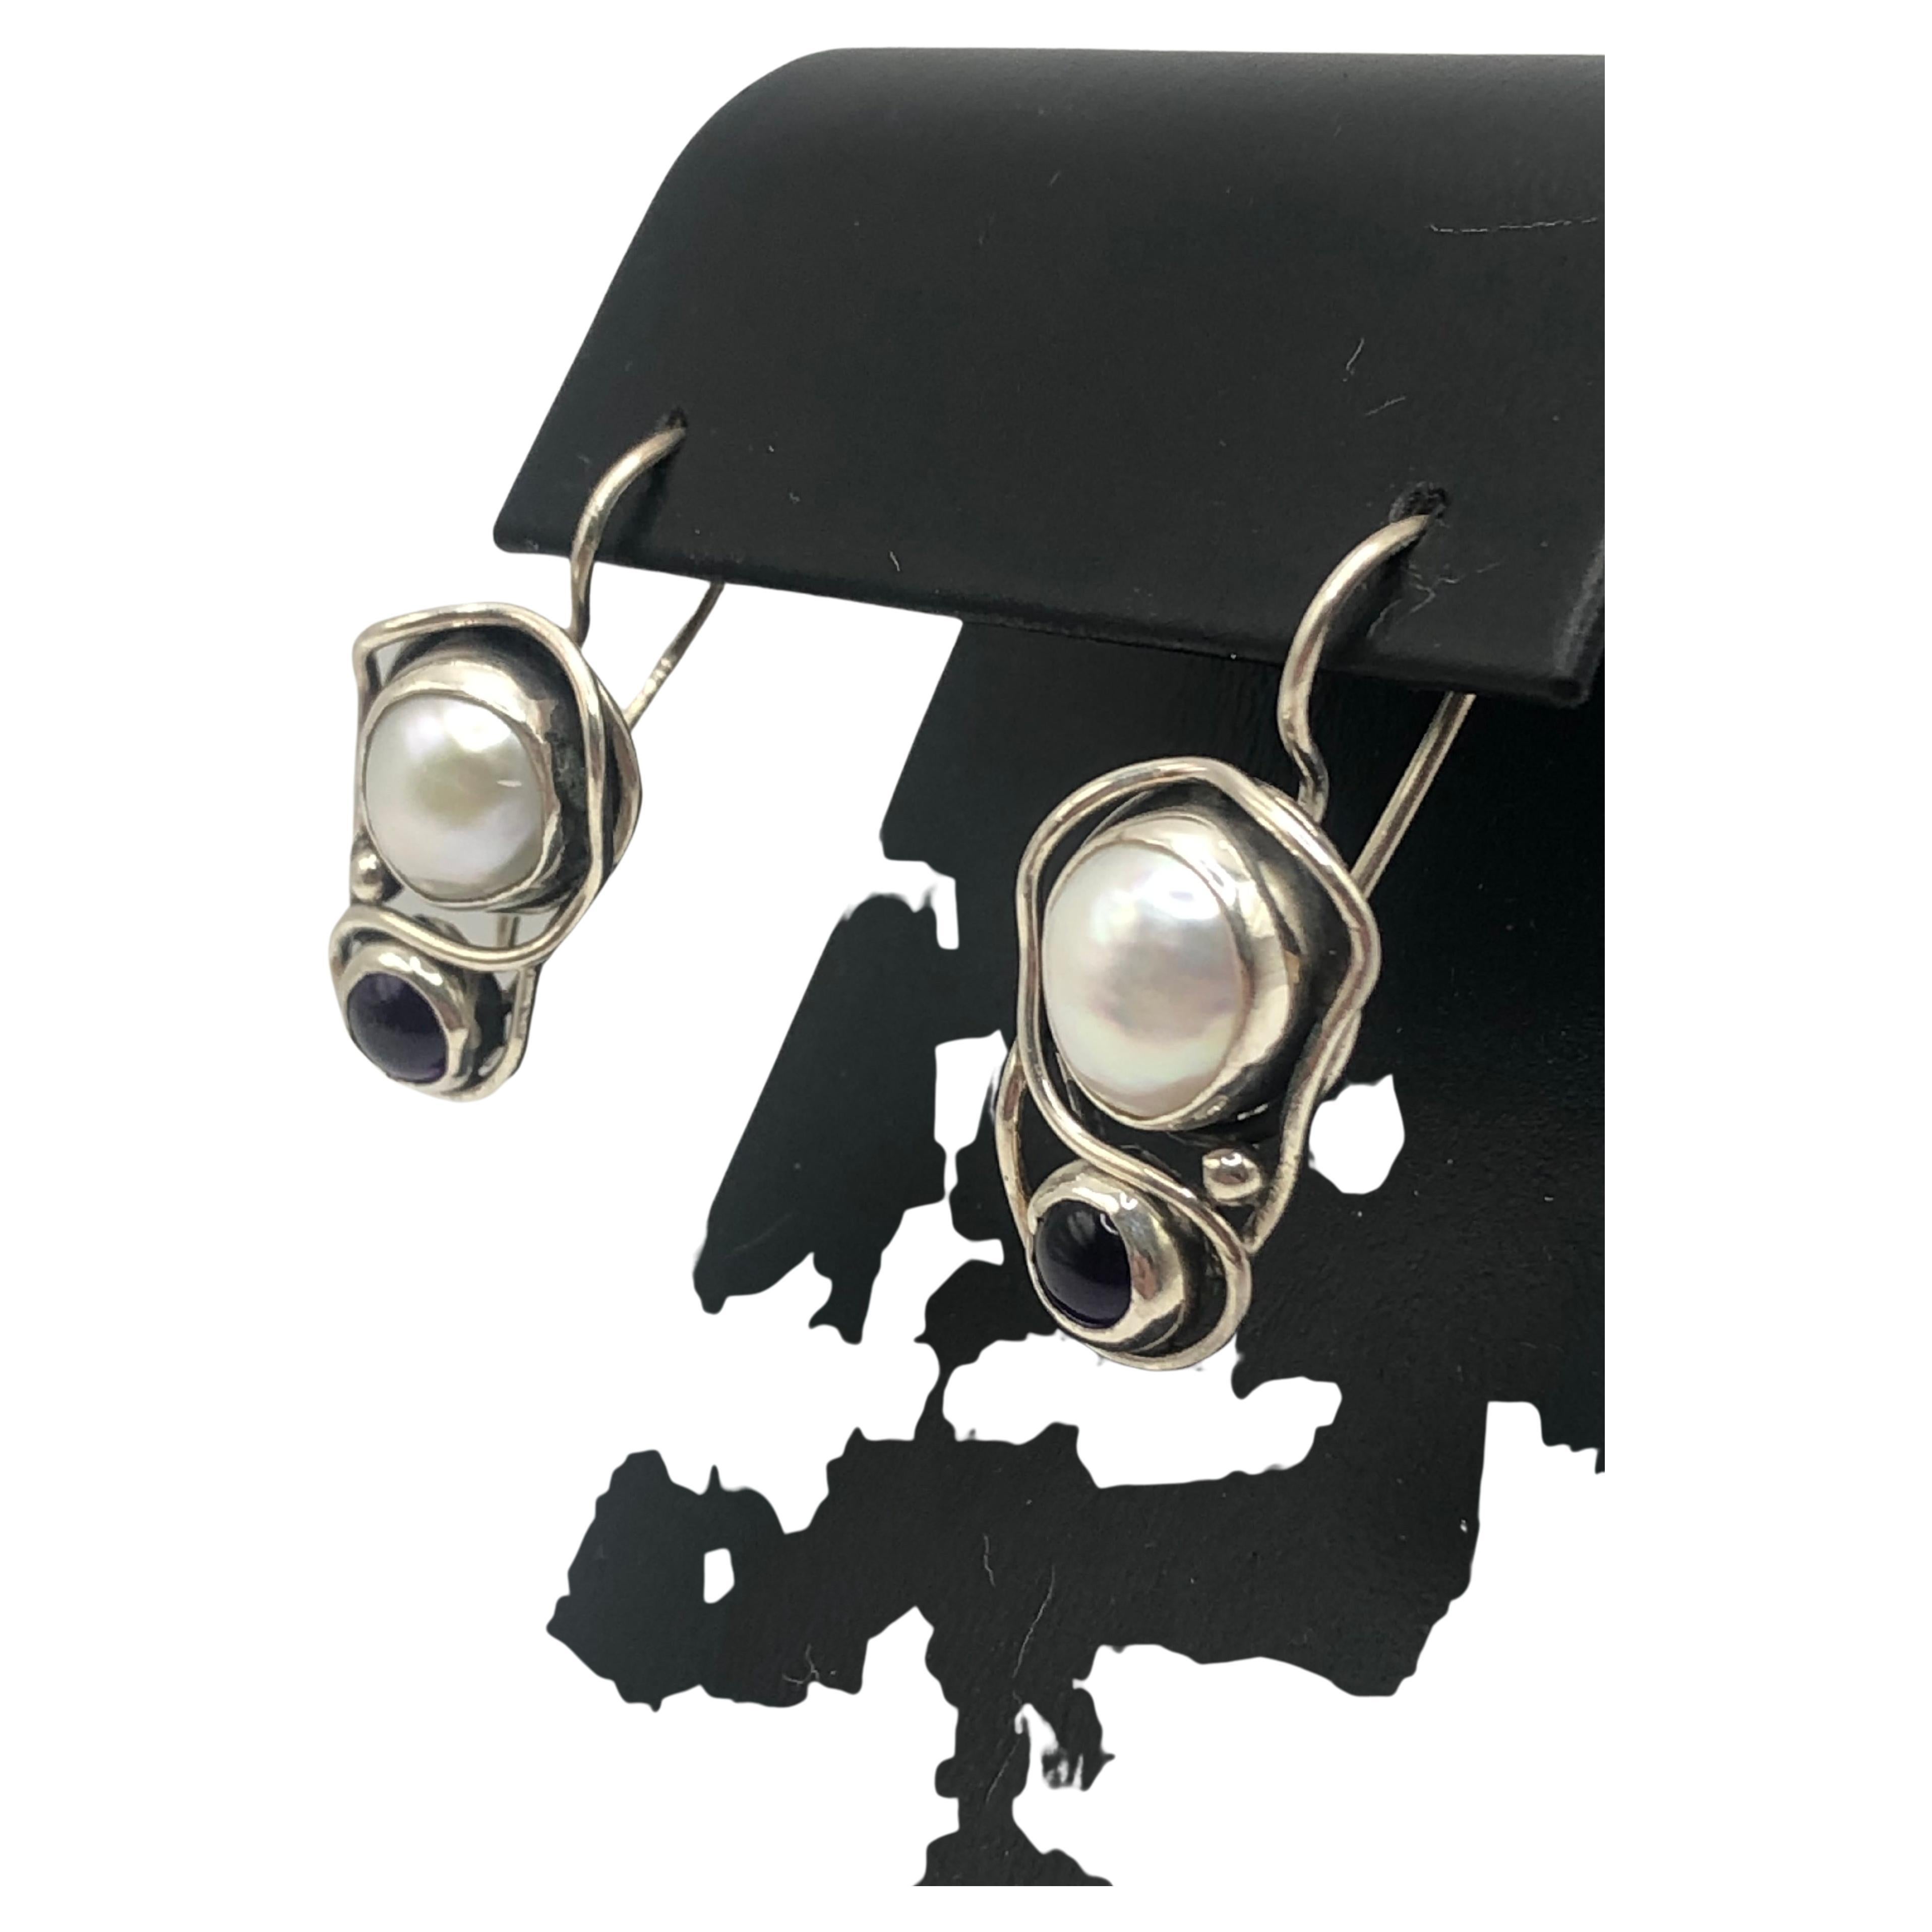 Handmade Earrings
Materials used: Organic Sterling Silver
Freshwater Pearl
Garnet 
in organic sterling silver setting 
One of piece 
$ USD 250 with free world shipping
Weight: 7.2 g 